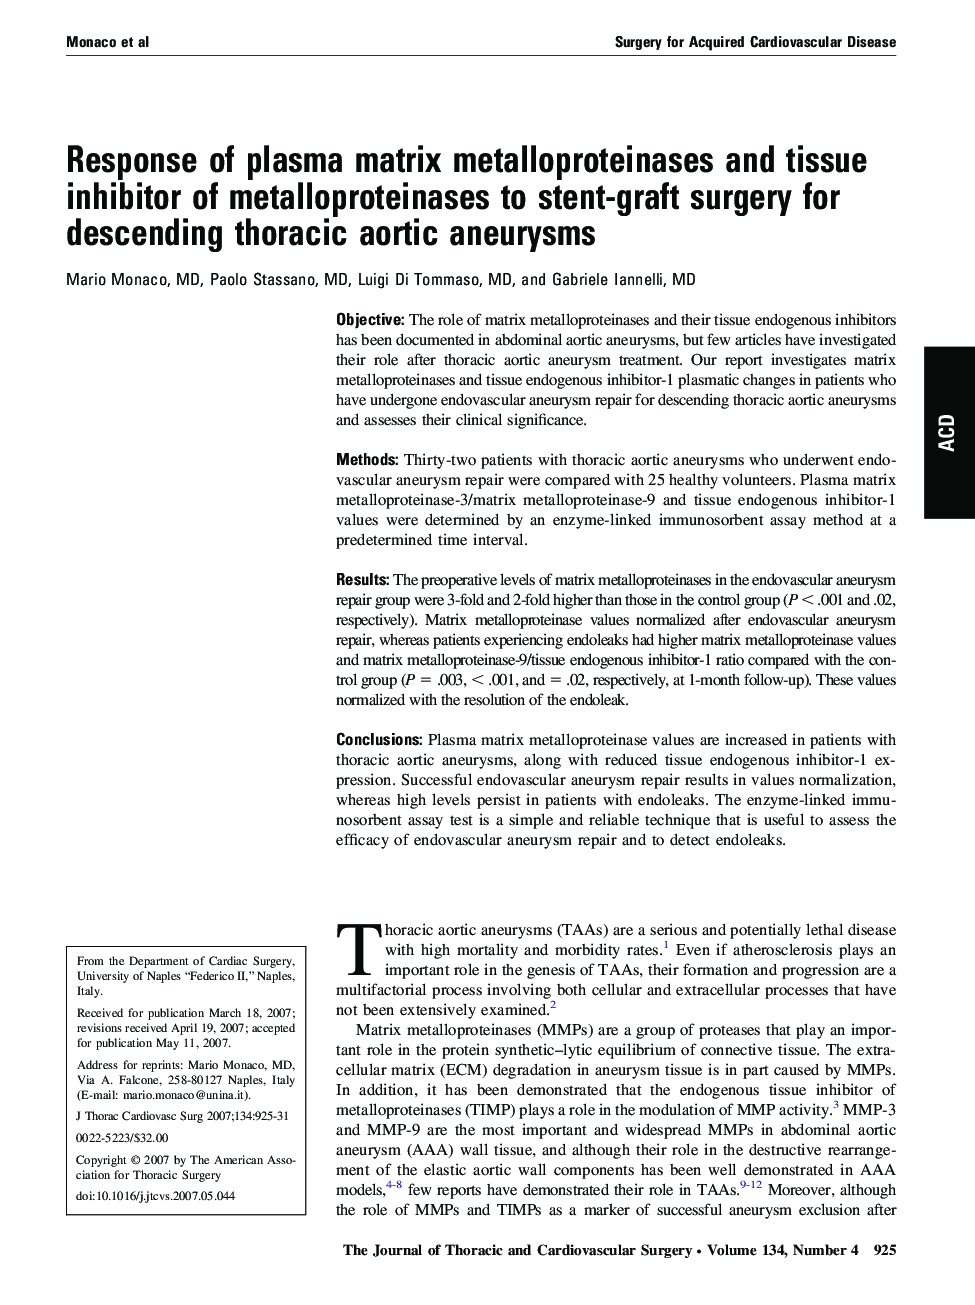 Response of plasma matrix metalloproteinases and tissue inhibitor of metalloproteinases to stent-graft surgery for descending thoracic aortic aneurysms